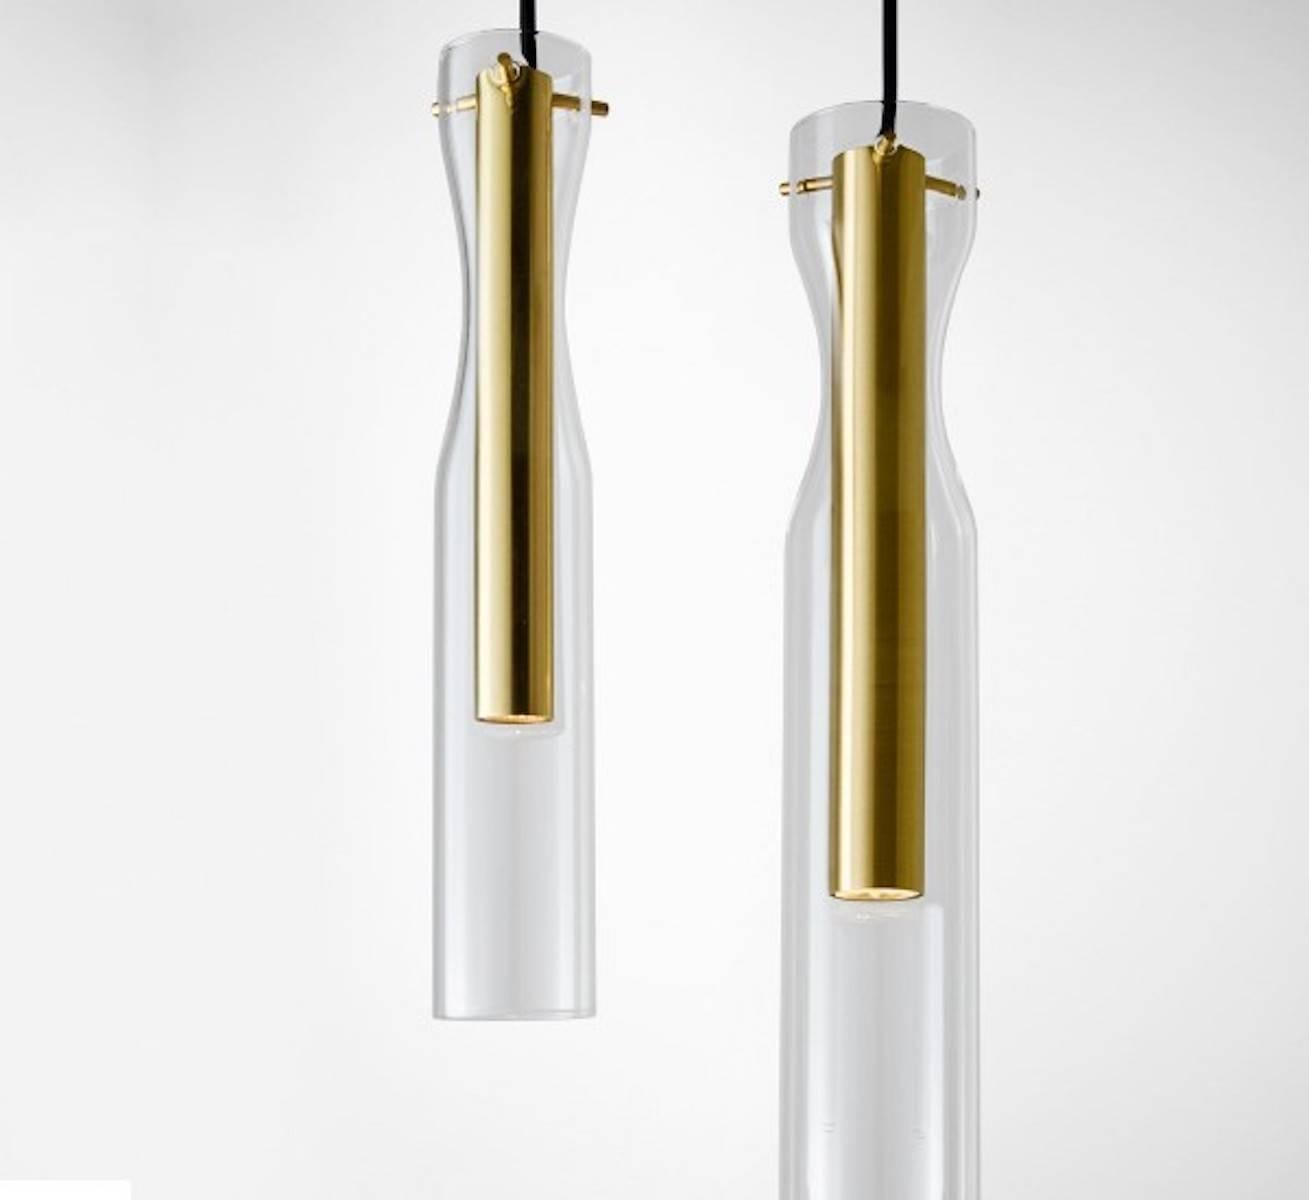 Hanging lamp with LED light (4 Watt). Handshaped glass cylinders. 

Interior is available in bright, satin, hand burnished, black chromed or coppered brass. Supplied with 4 meter long cable.

Two sizes available: 
Inch 
Small Ø 2.5 x 14.75 h 
Large